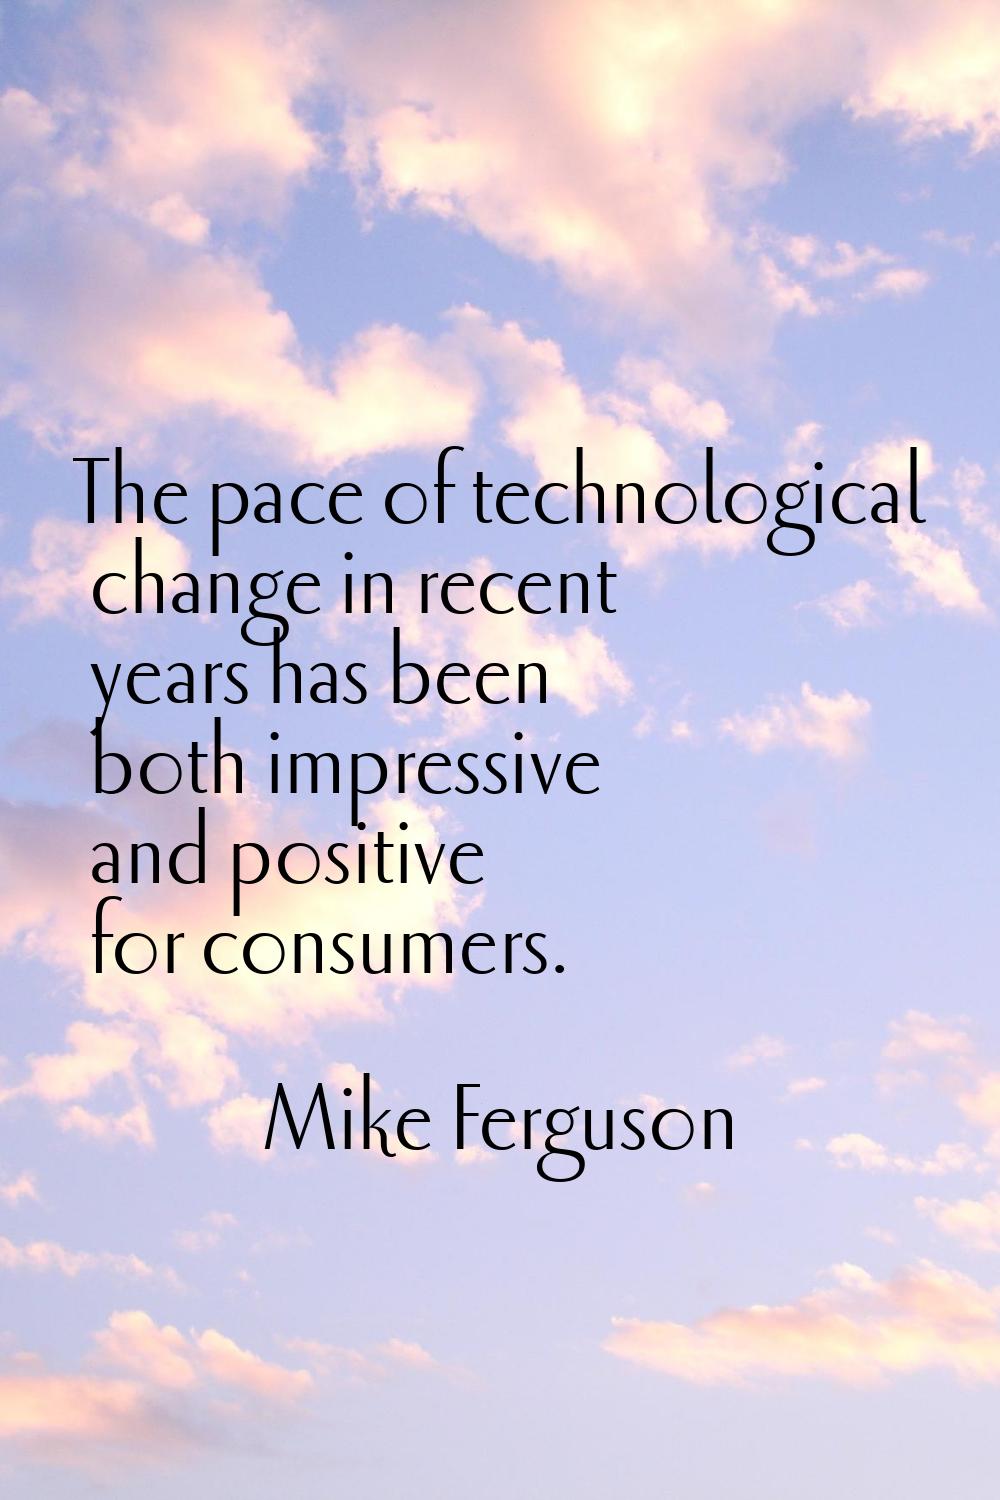 The pace of technological change in recent years has been both impressive and positive for consumer